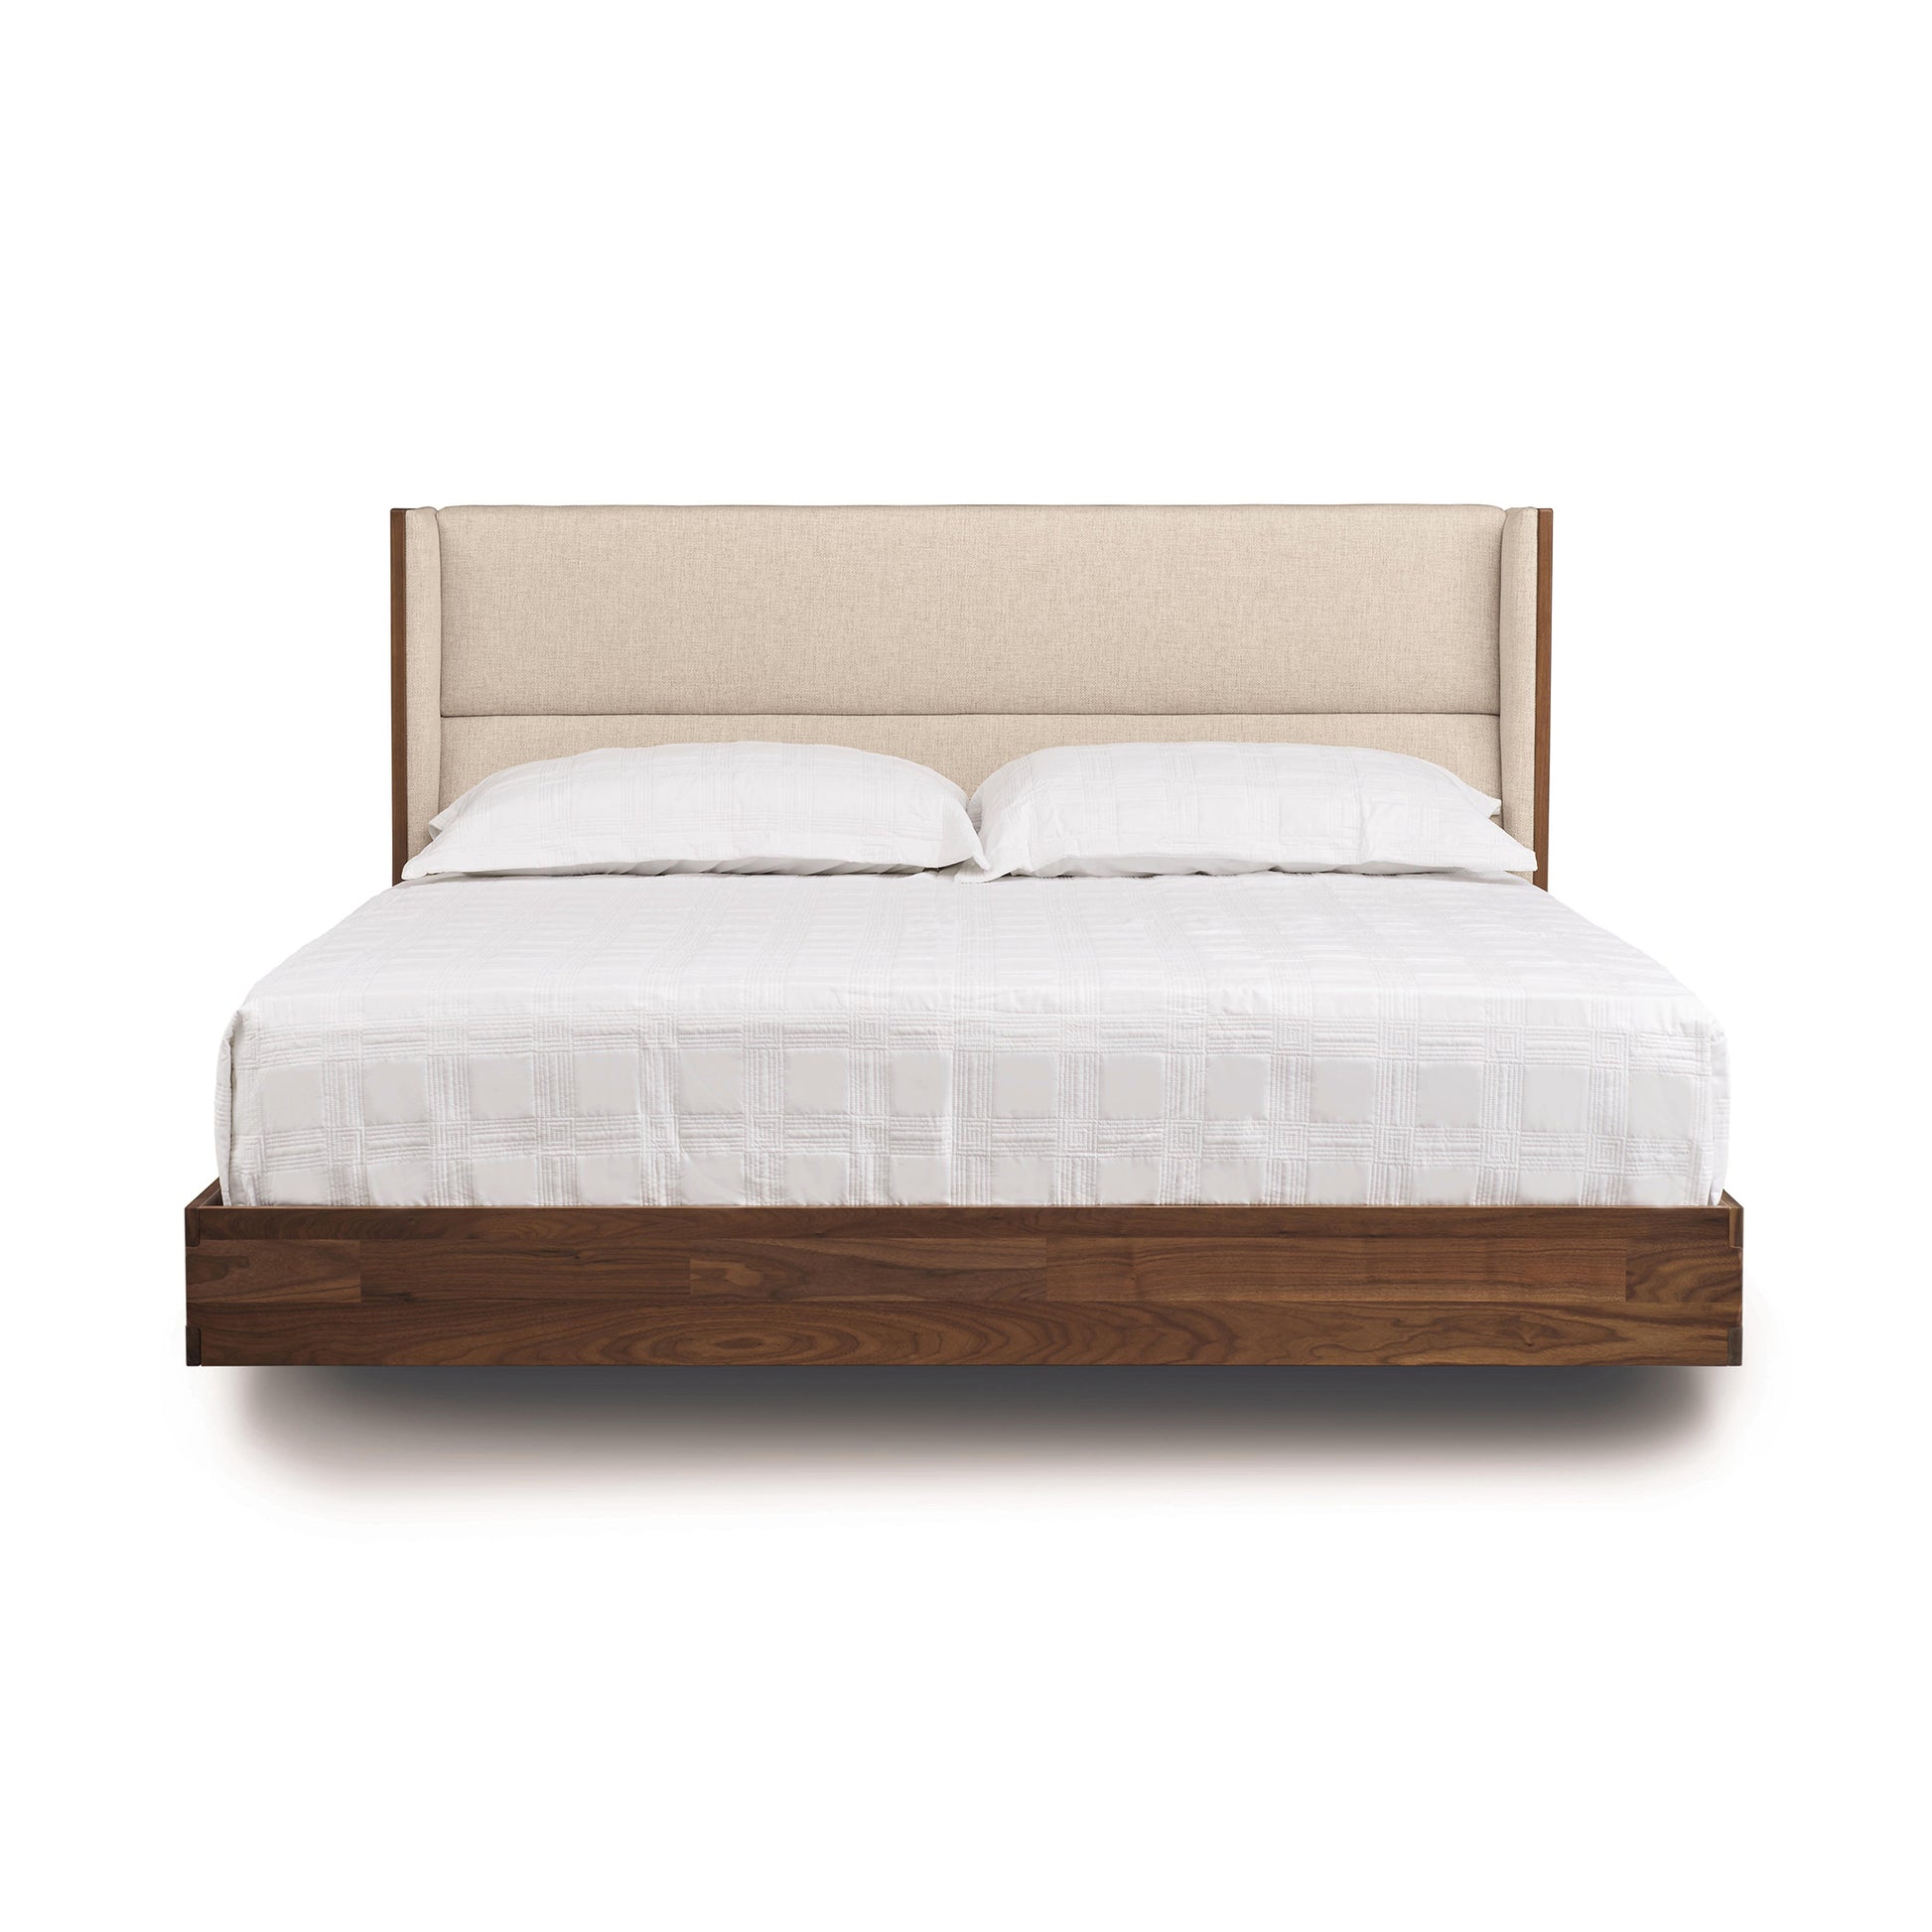 A modern Copeland Furniture Sloane Floating Bed with a beige headboard and white bedding on an isolated white background.